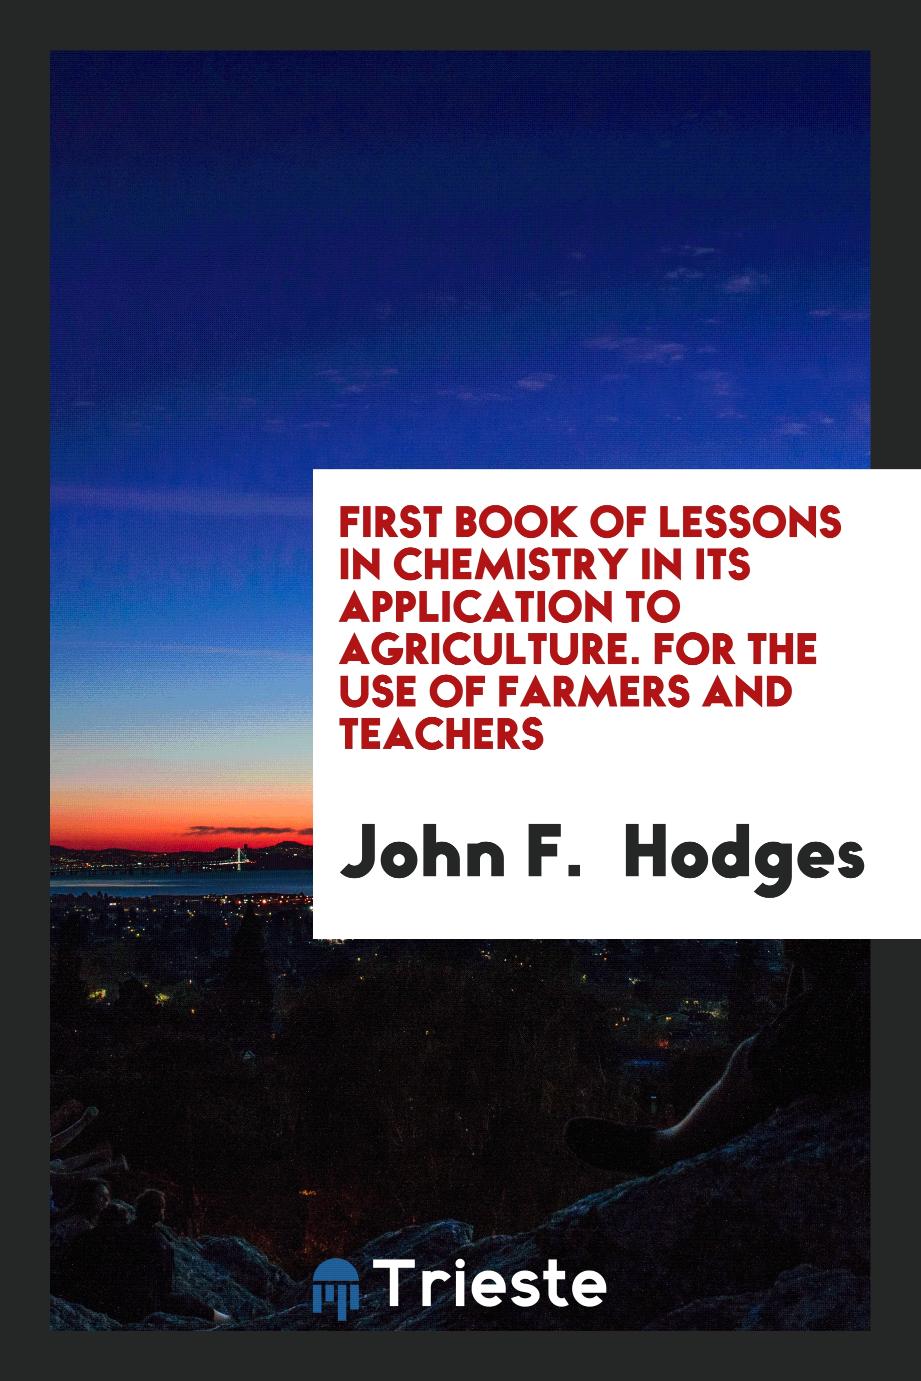 First Book of Lessons in Chemistry in Its Application to Agriculture. For the Use of Farmers and Teachers